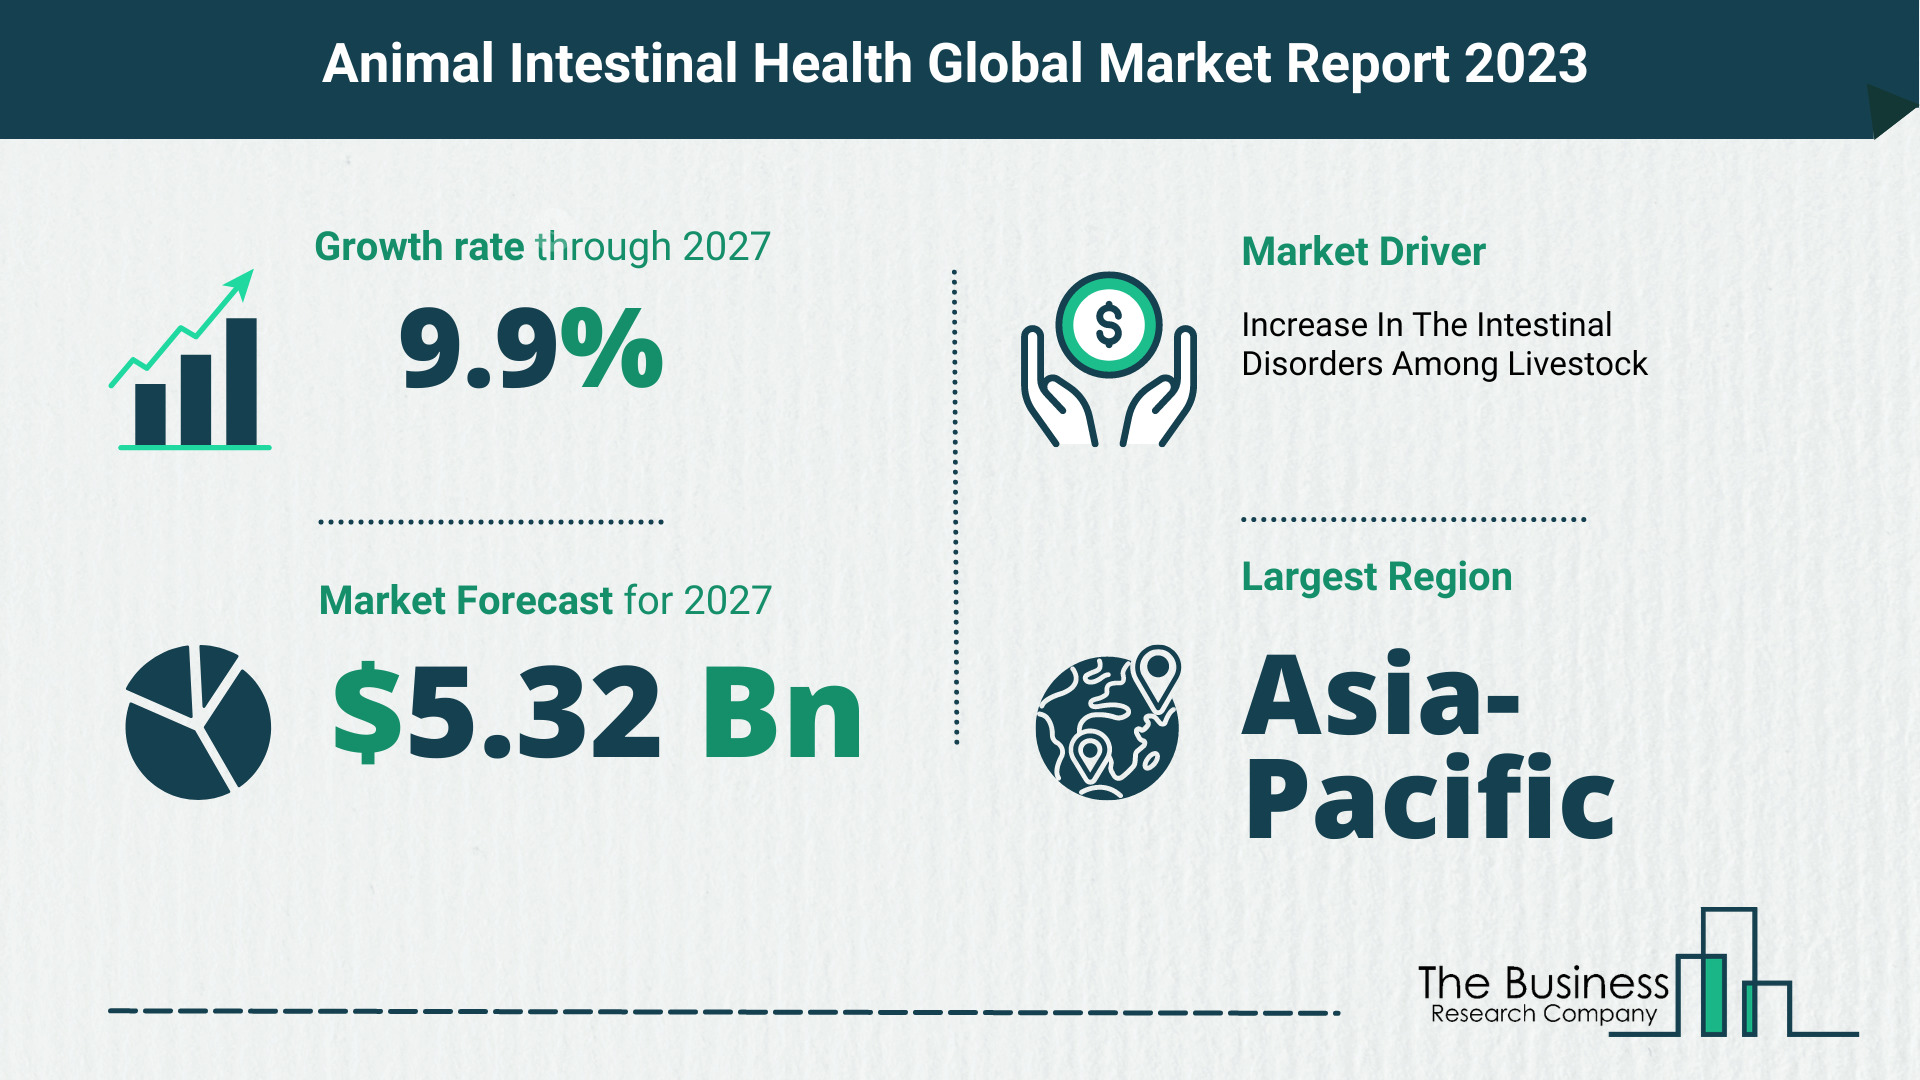 How Will The Animal Intestinal Health Market Globally Expand In 2023?